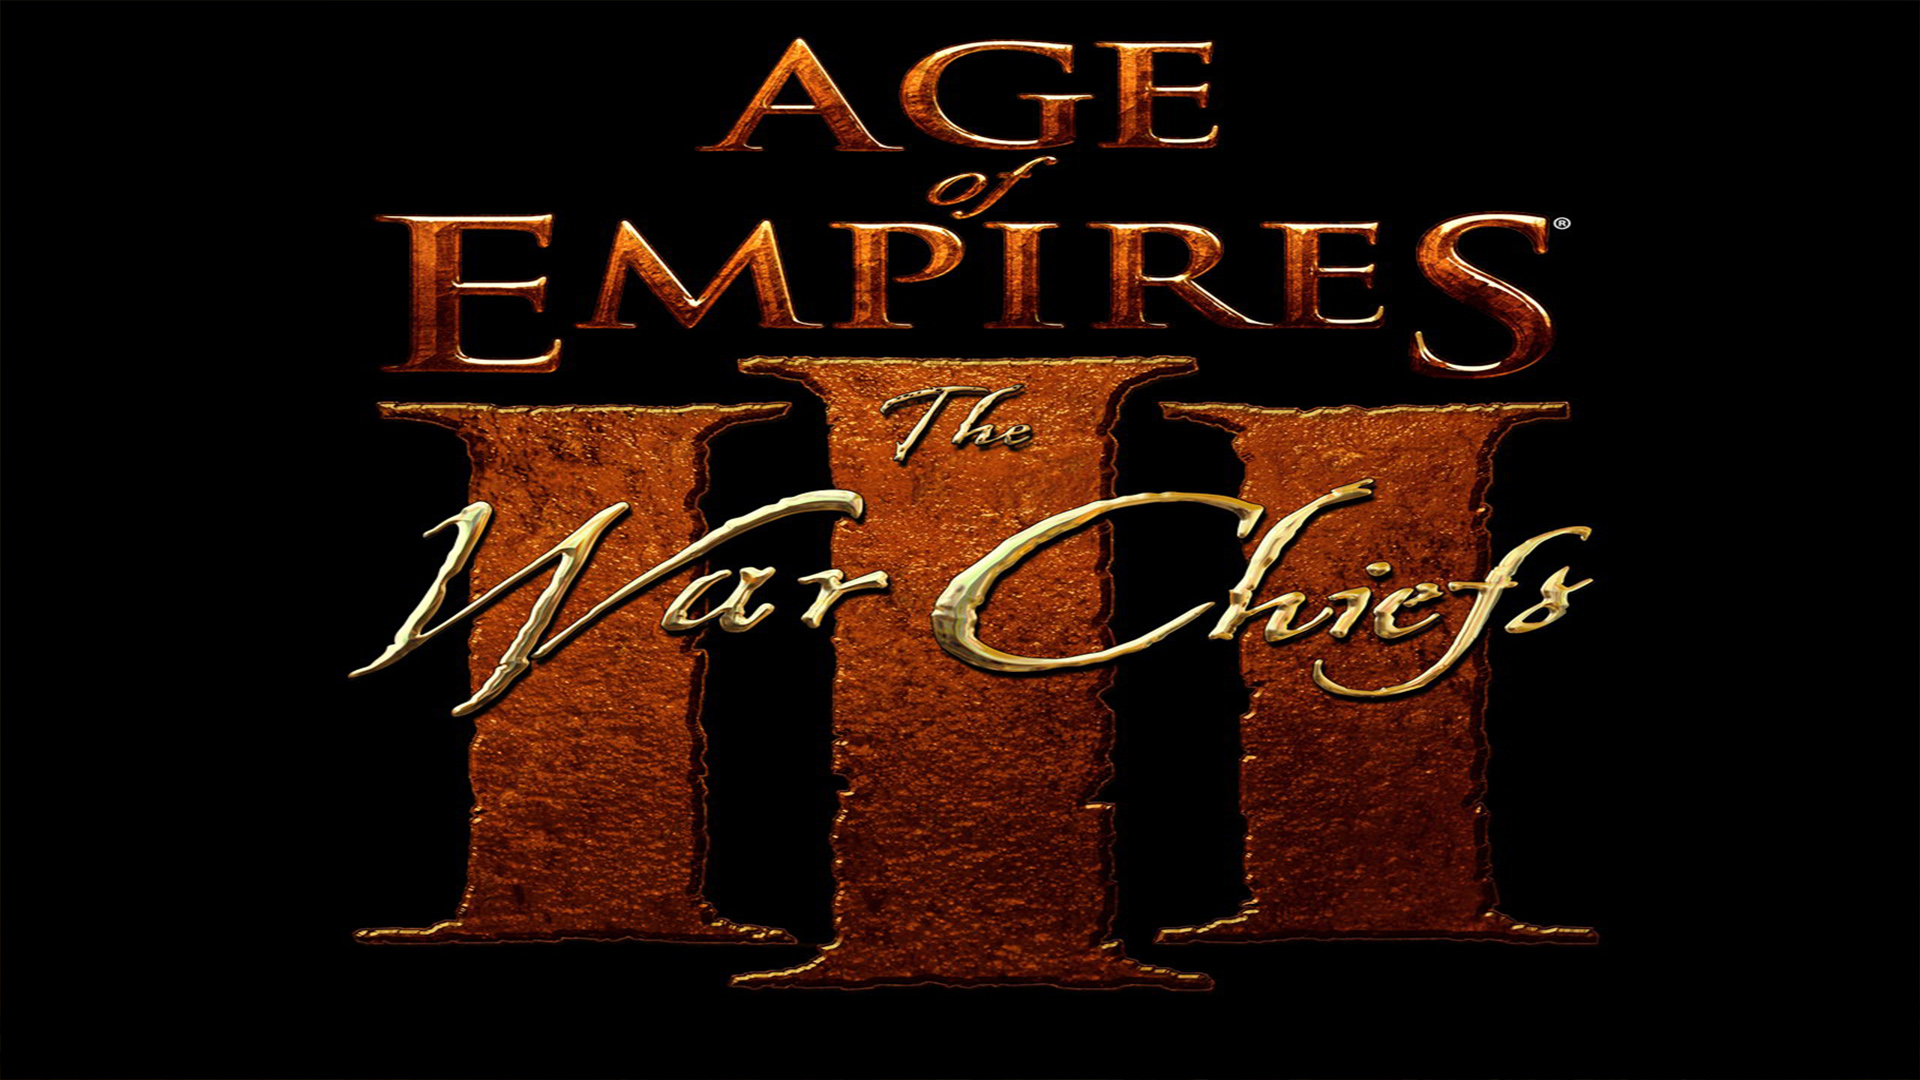 Age of Empires III: The WarChiefs HD Wallpaper